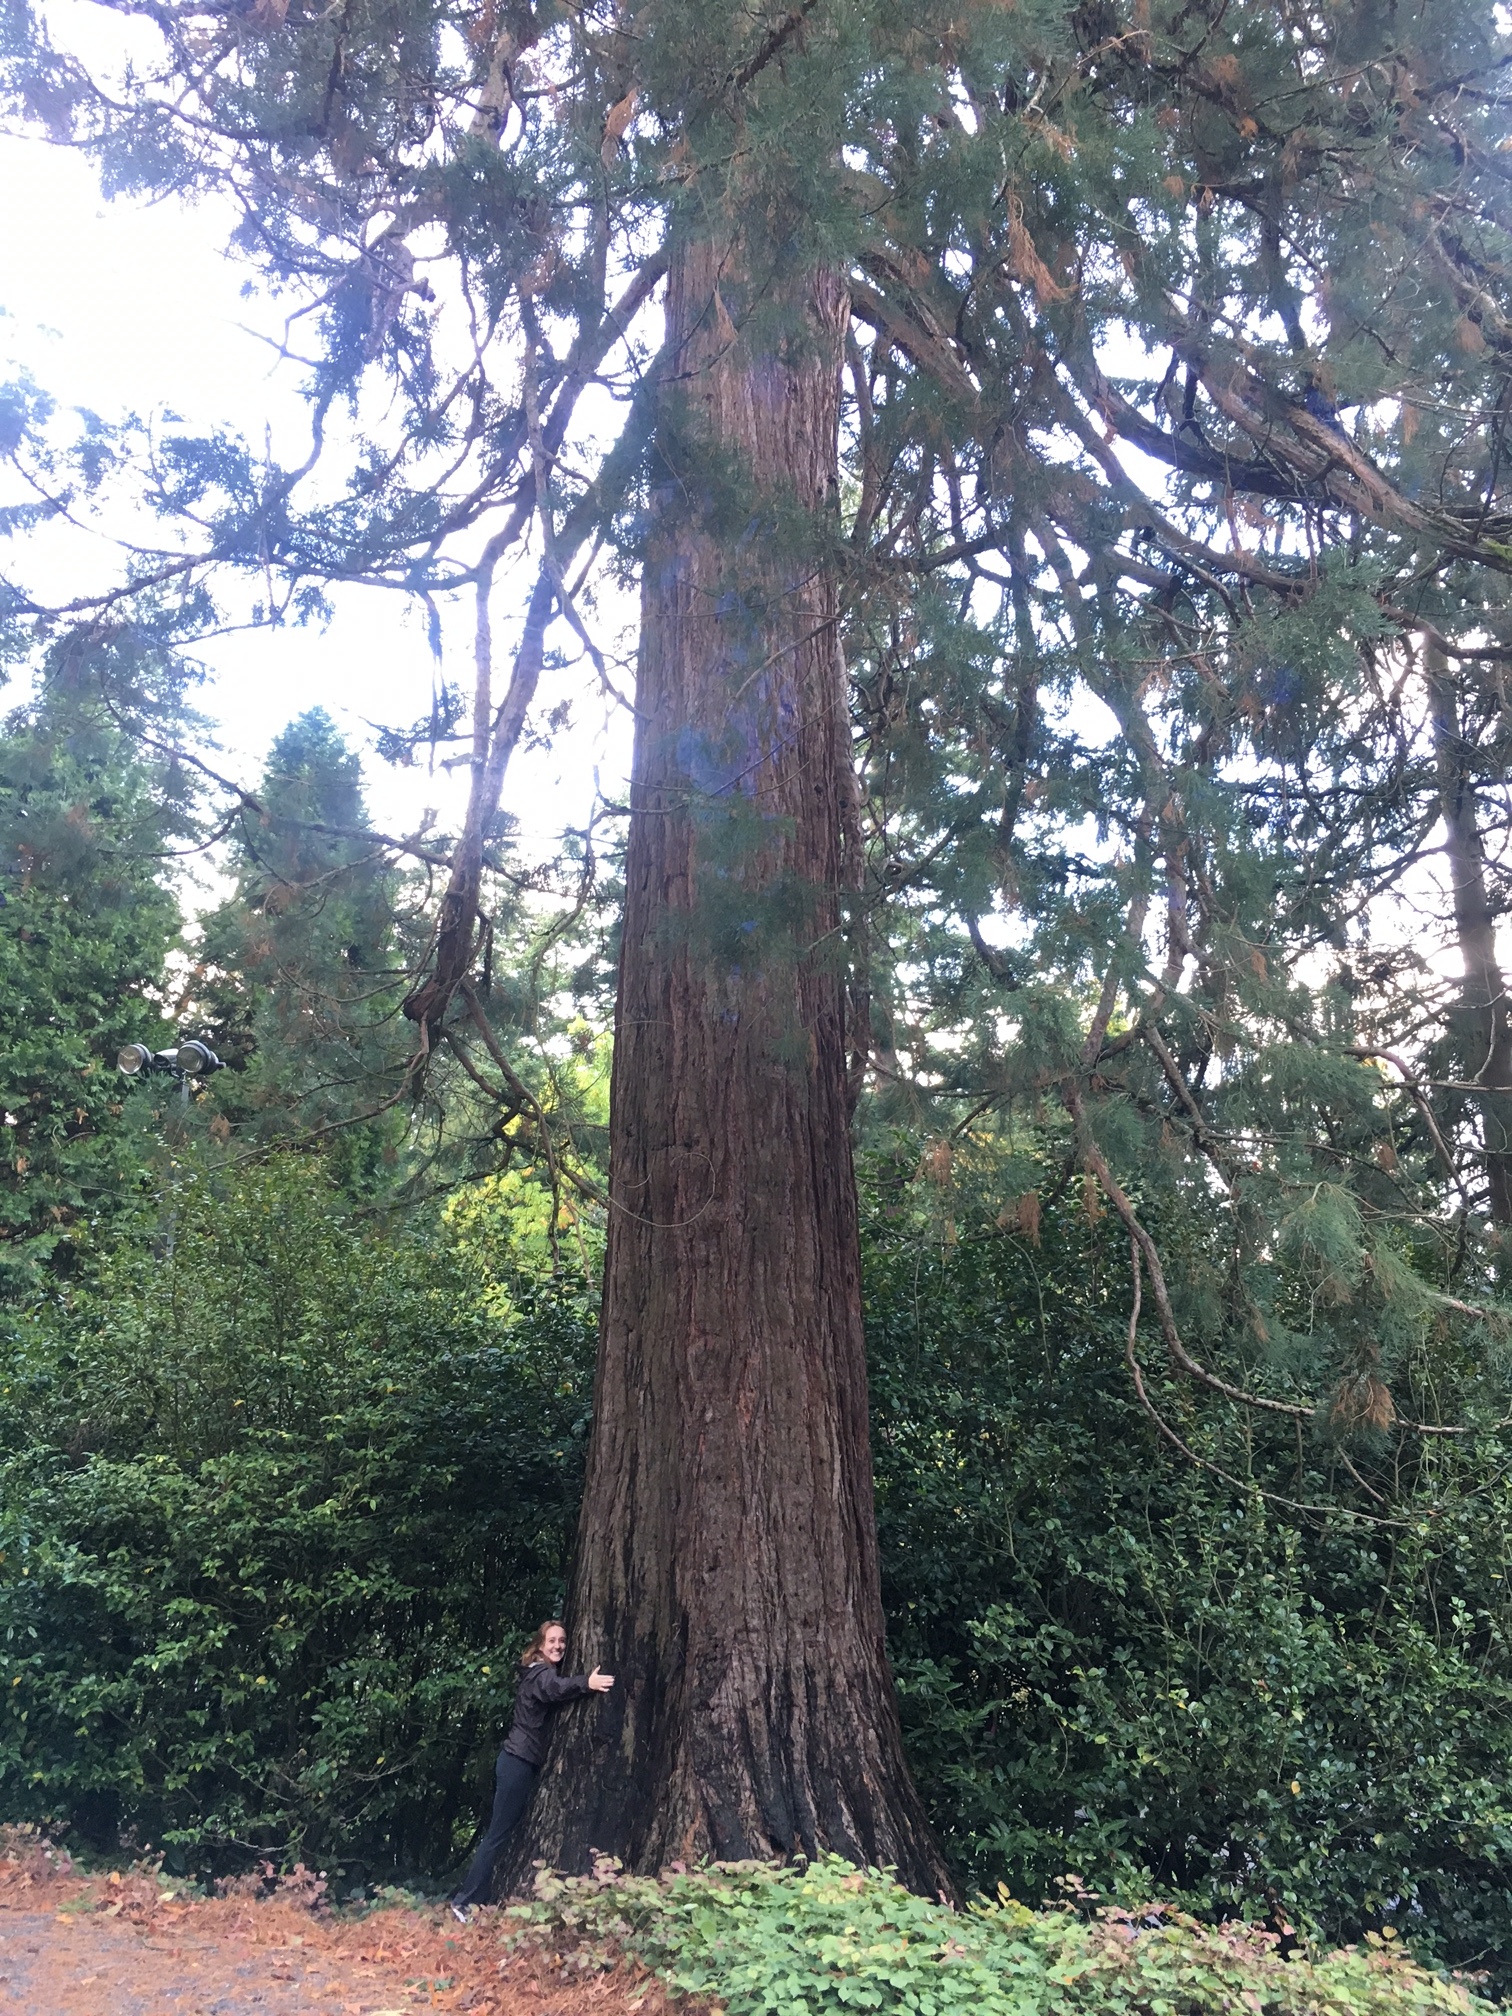 Samantha hugging an old growth tree in Portland's Rose Garden.